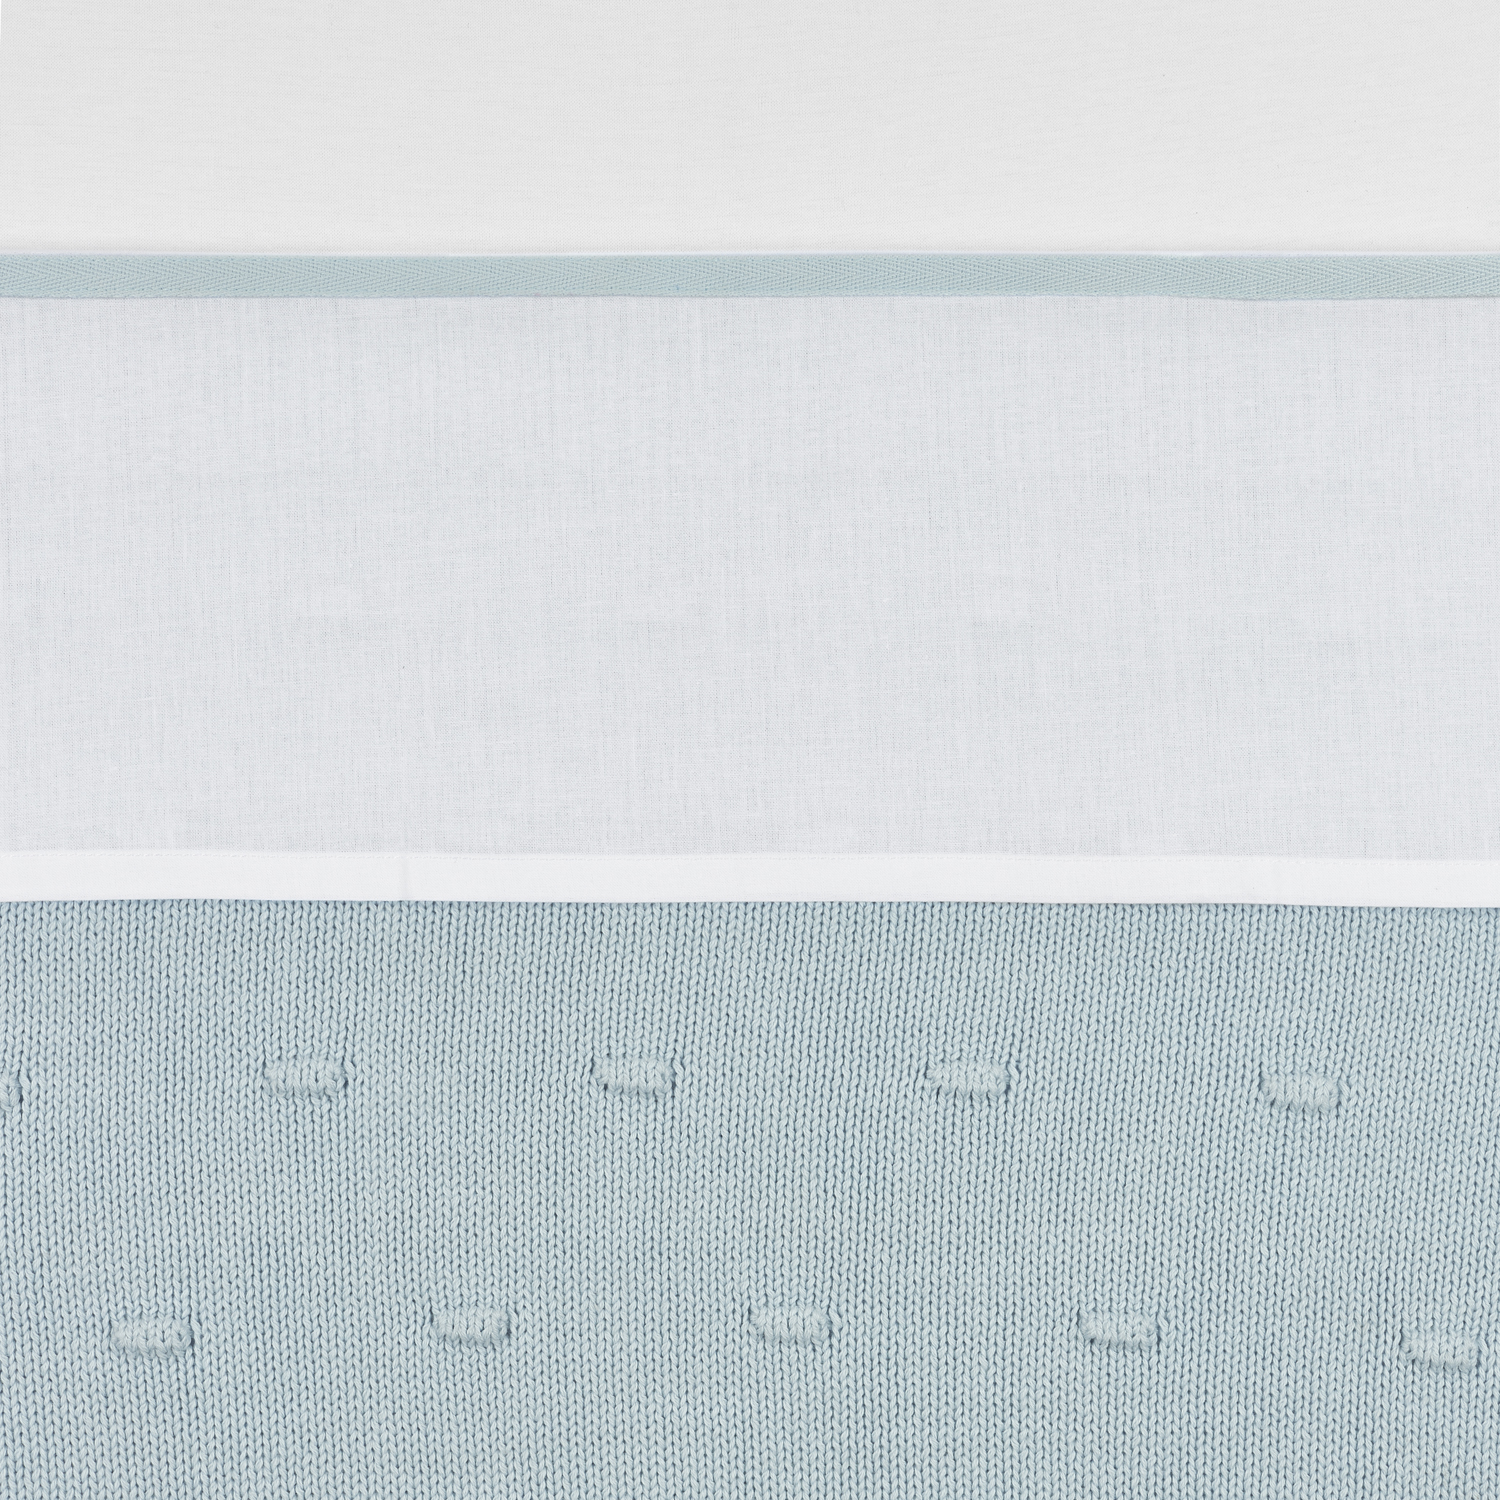 Cot Bed Sheet Piping - Light Blue - 100x150cm